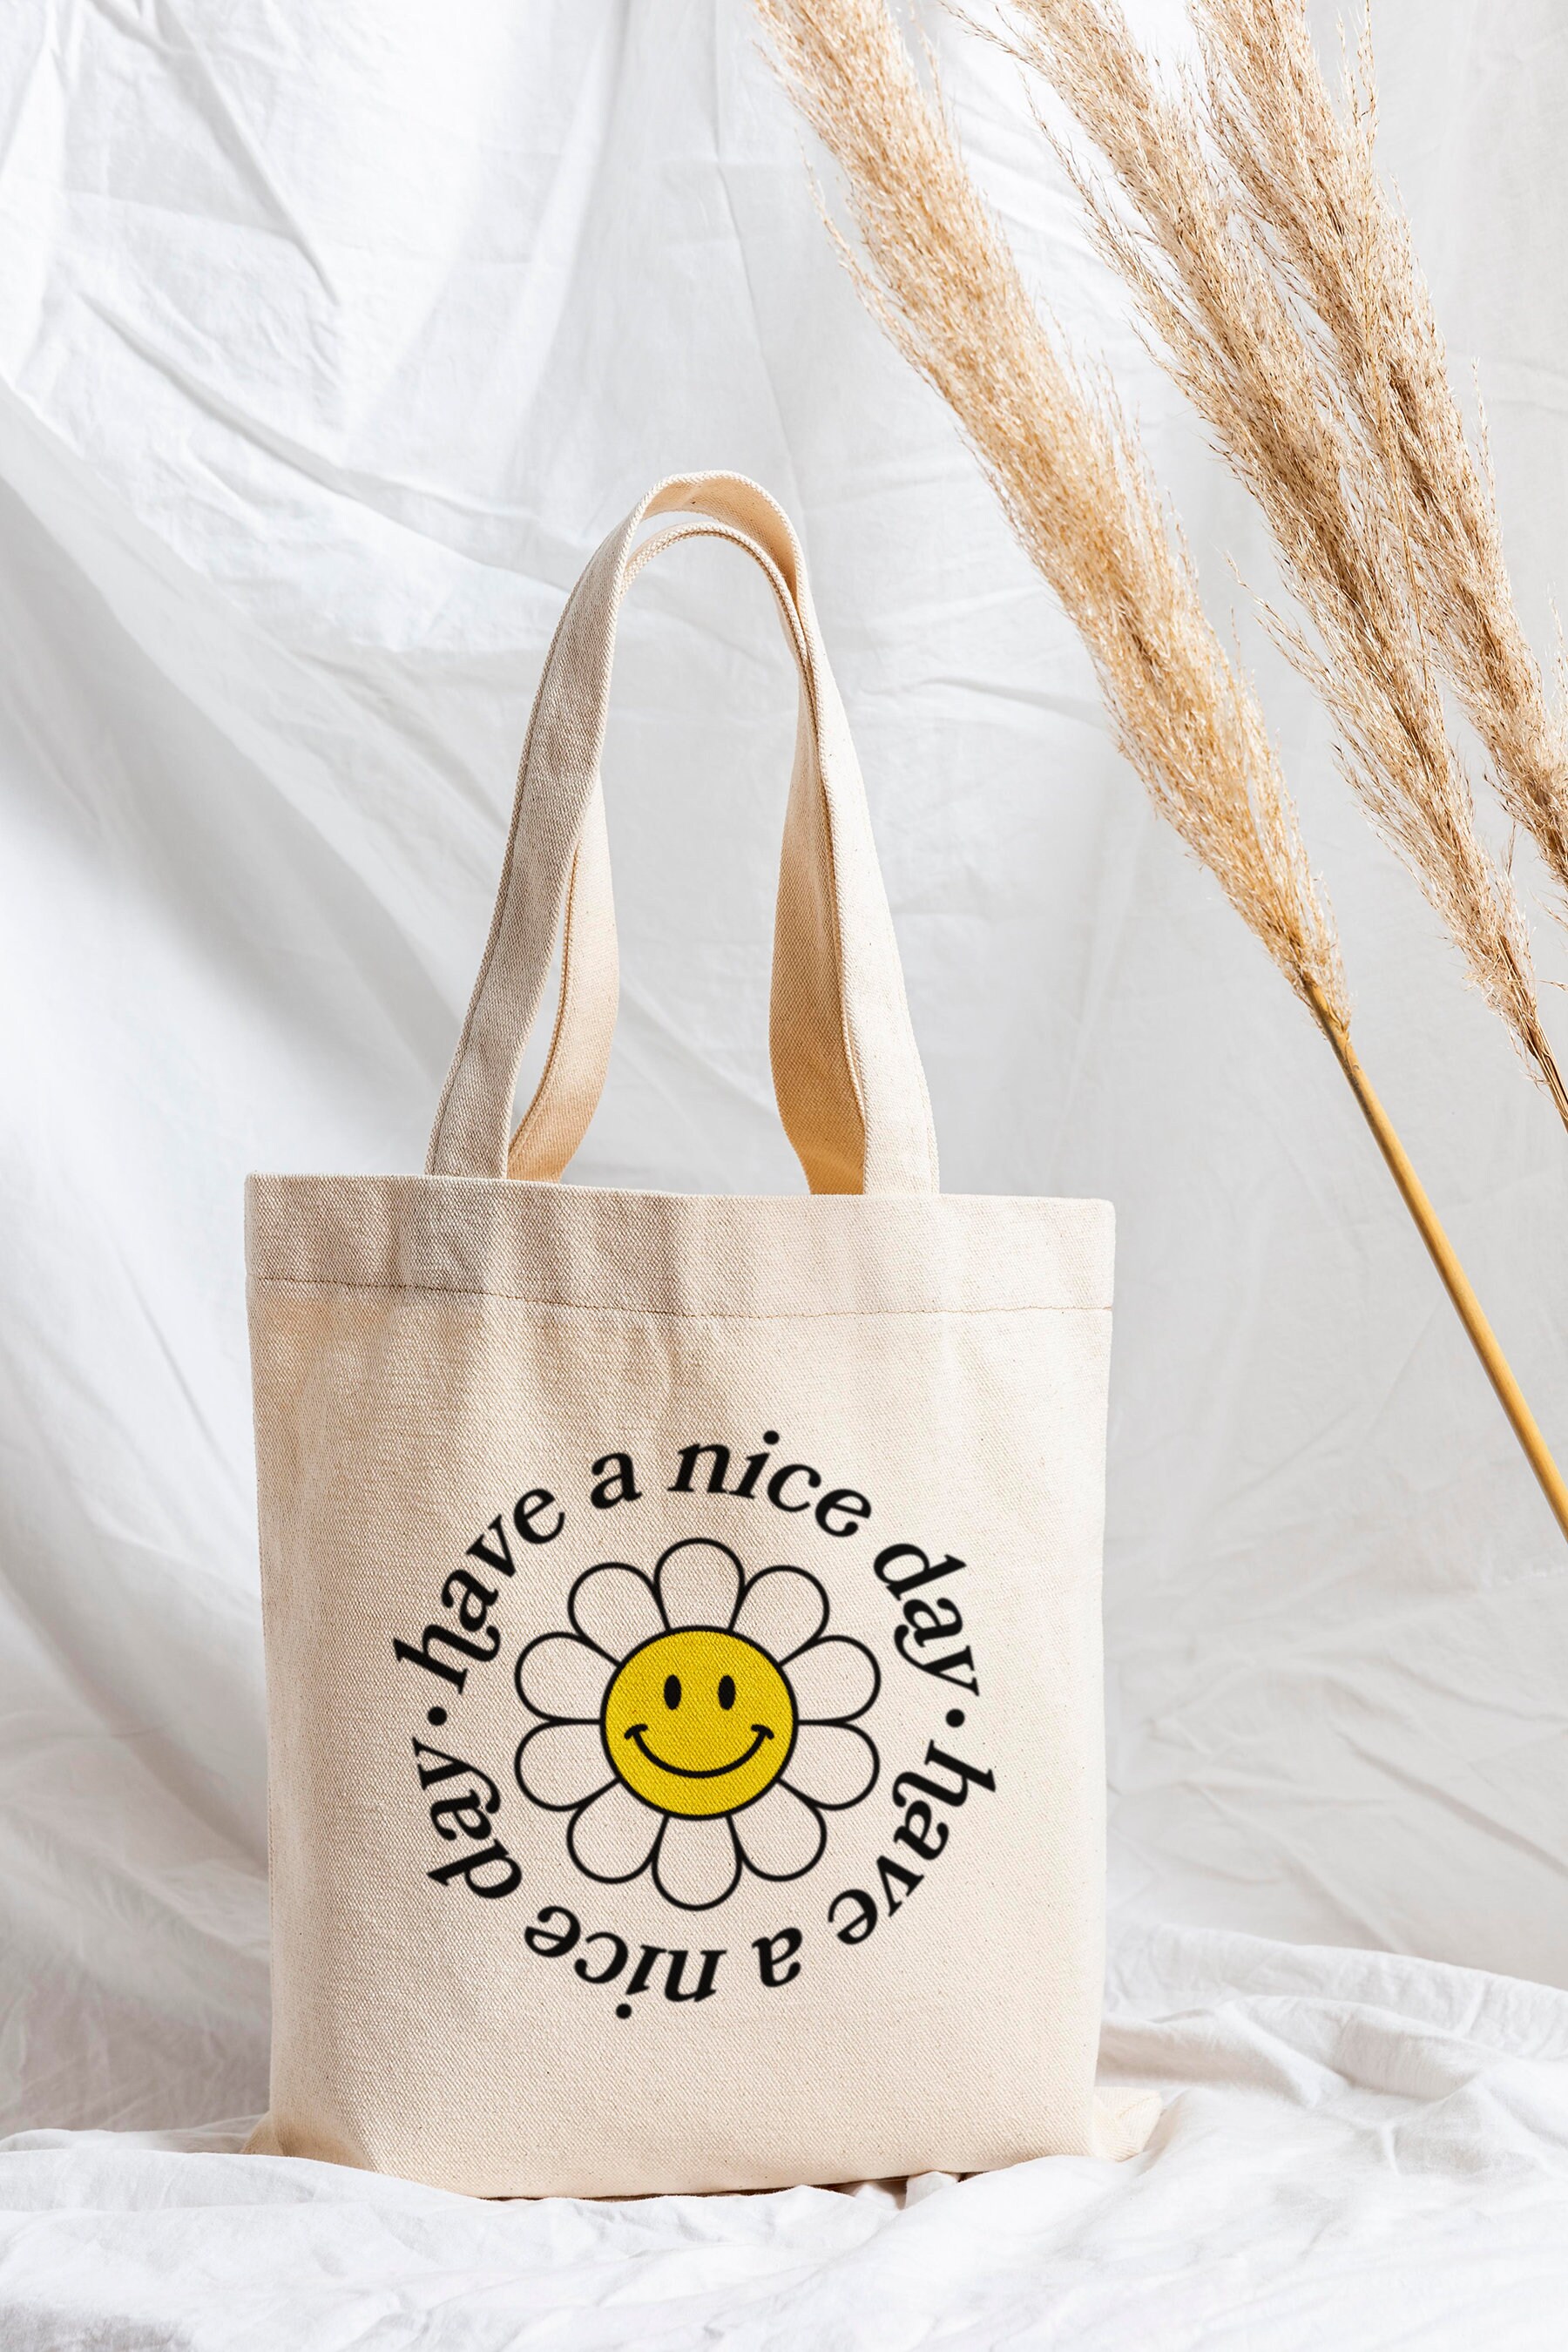 Have A Nice Day Cotton Tote Bag Beach Bag Shopping Bag - Etsy UK